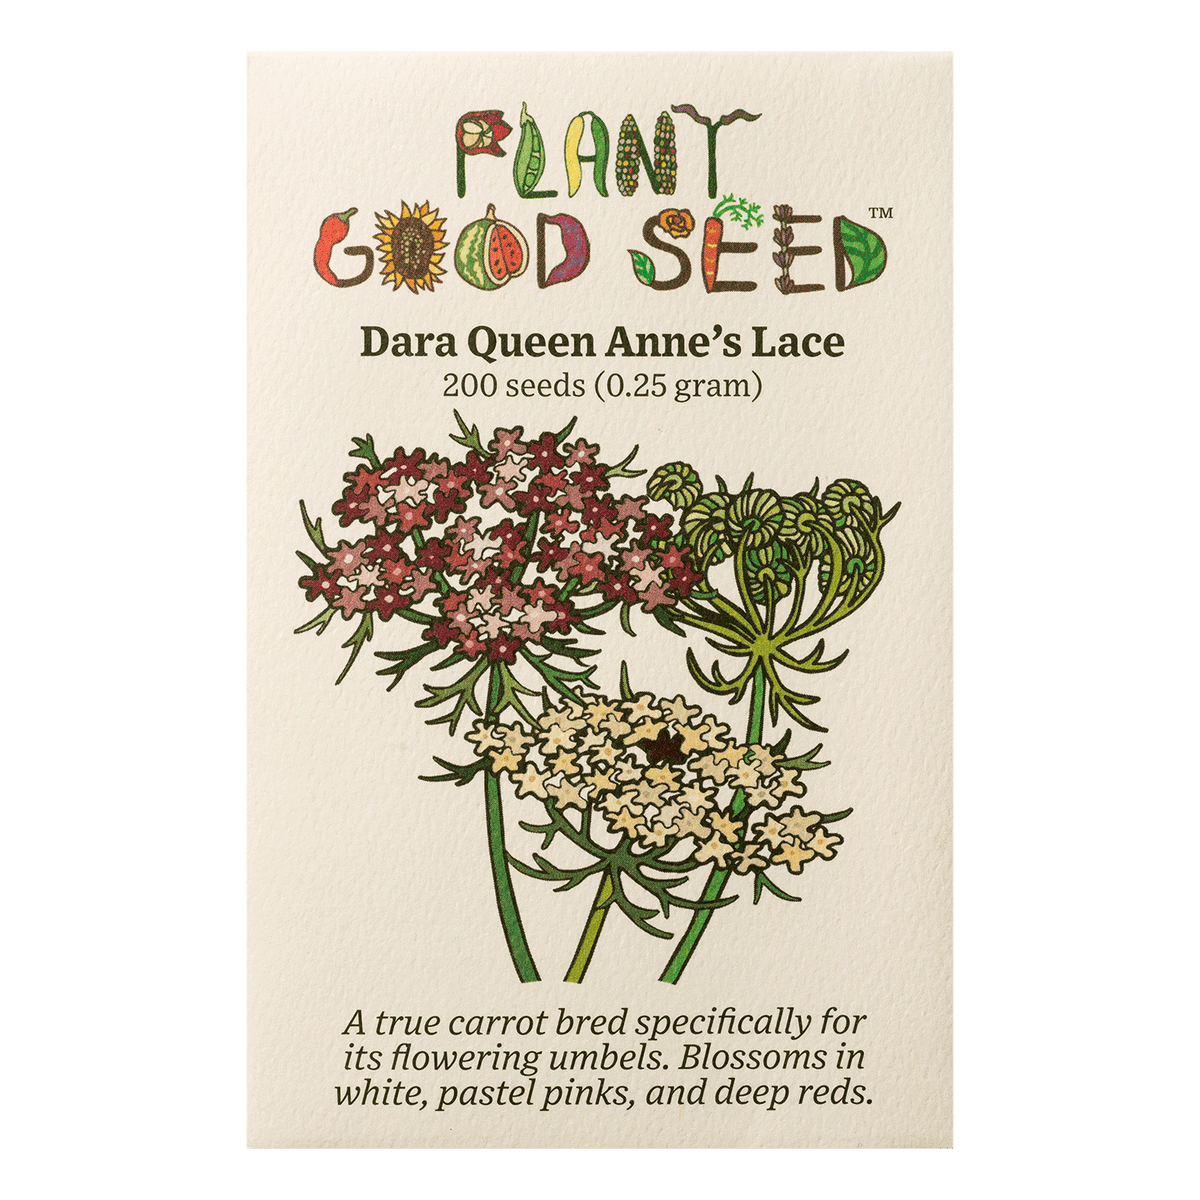 Dara Queen Anne's Lace Flower Seeds - The Plant Good Seed Company